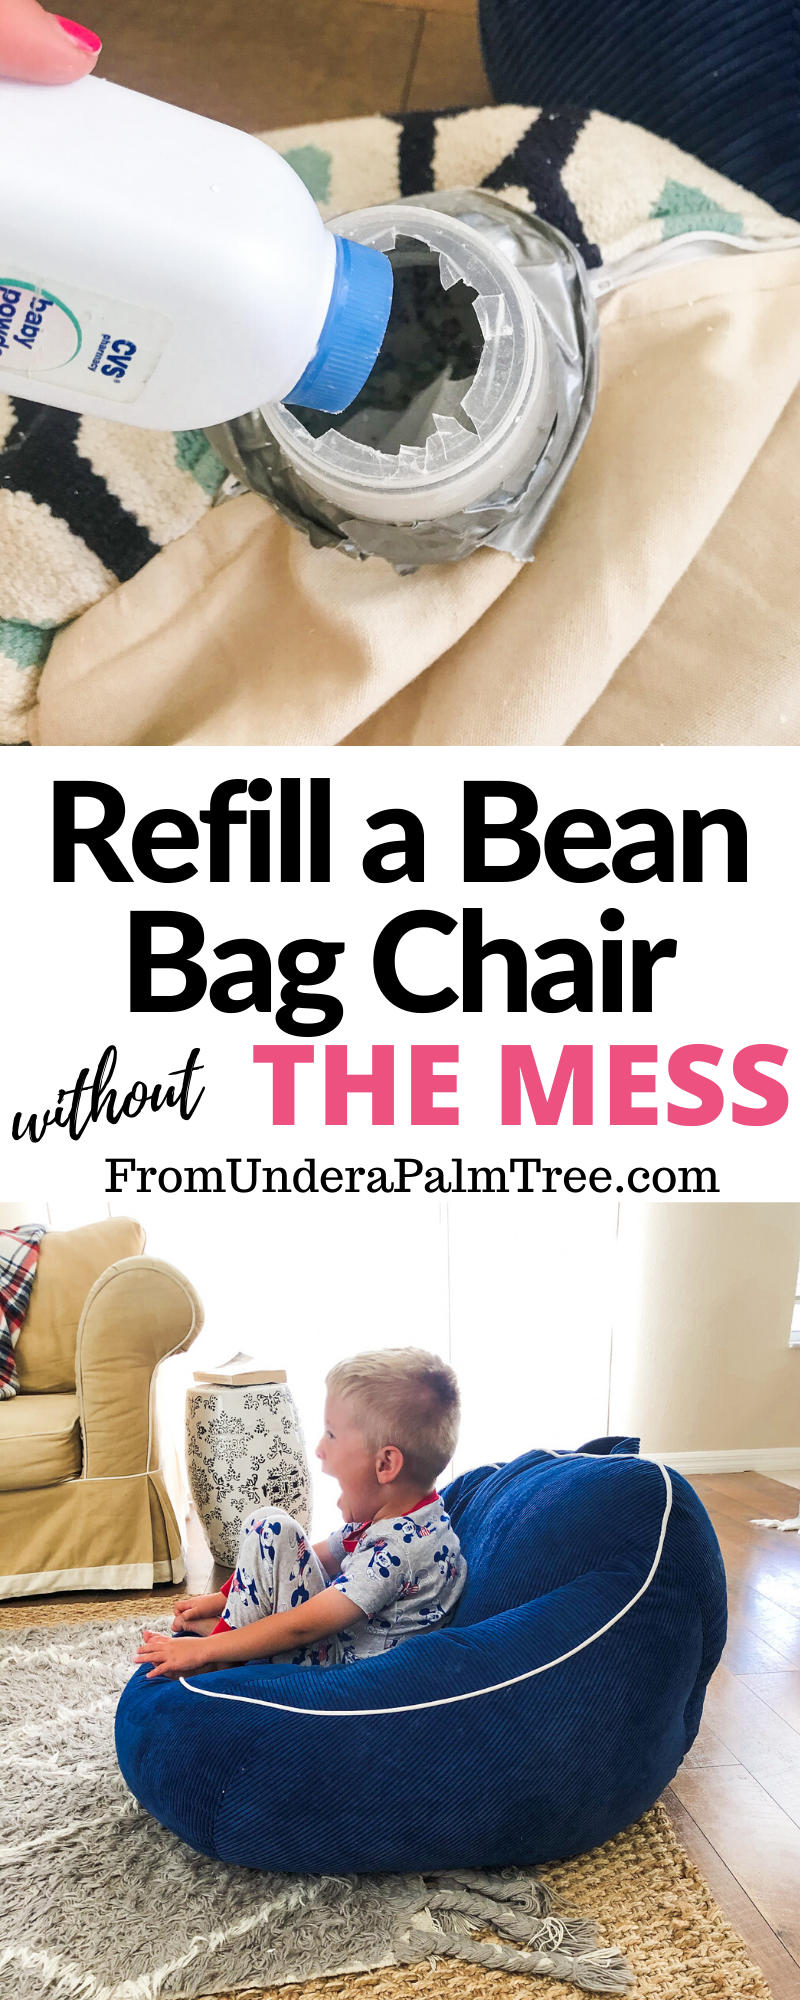 how to refill a bean bag chair | how to refill a bean bag | how to refill a bean bag without the mess | mess free bean bag refill | mom hacks | home hacks | cleaning tips | organization tips | best bean bags for kids | beast bean bag chairs | best kids chairs |